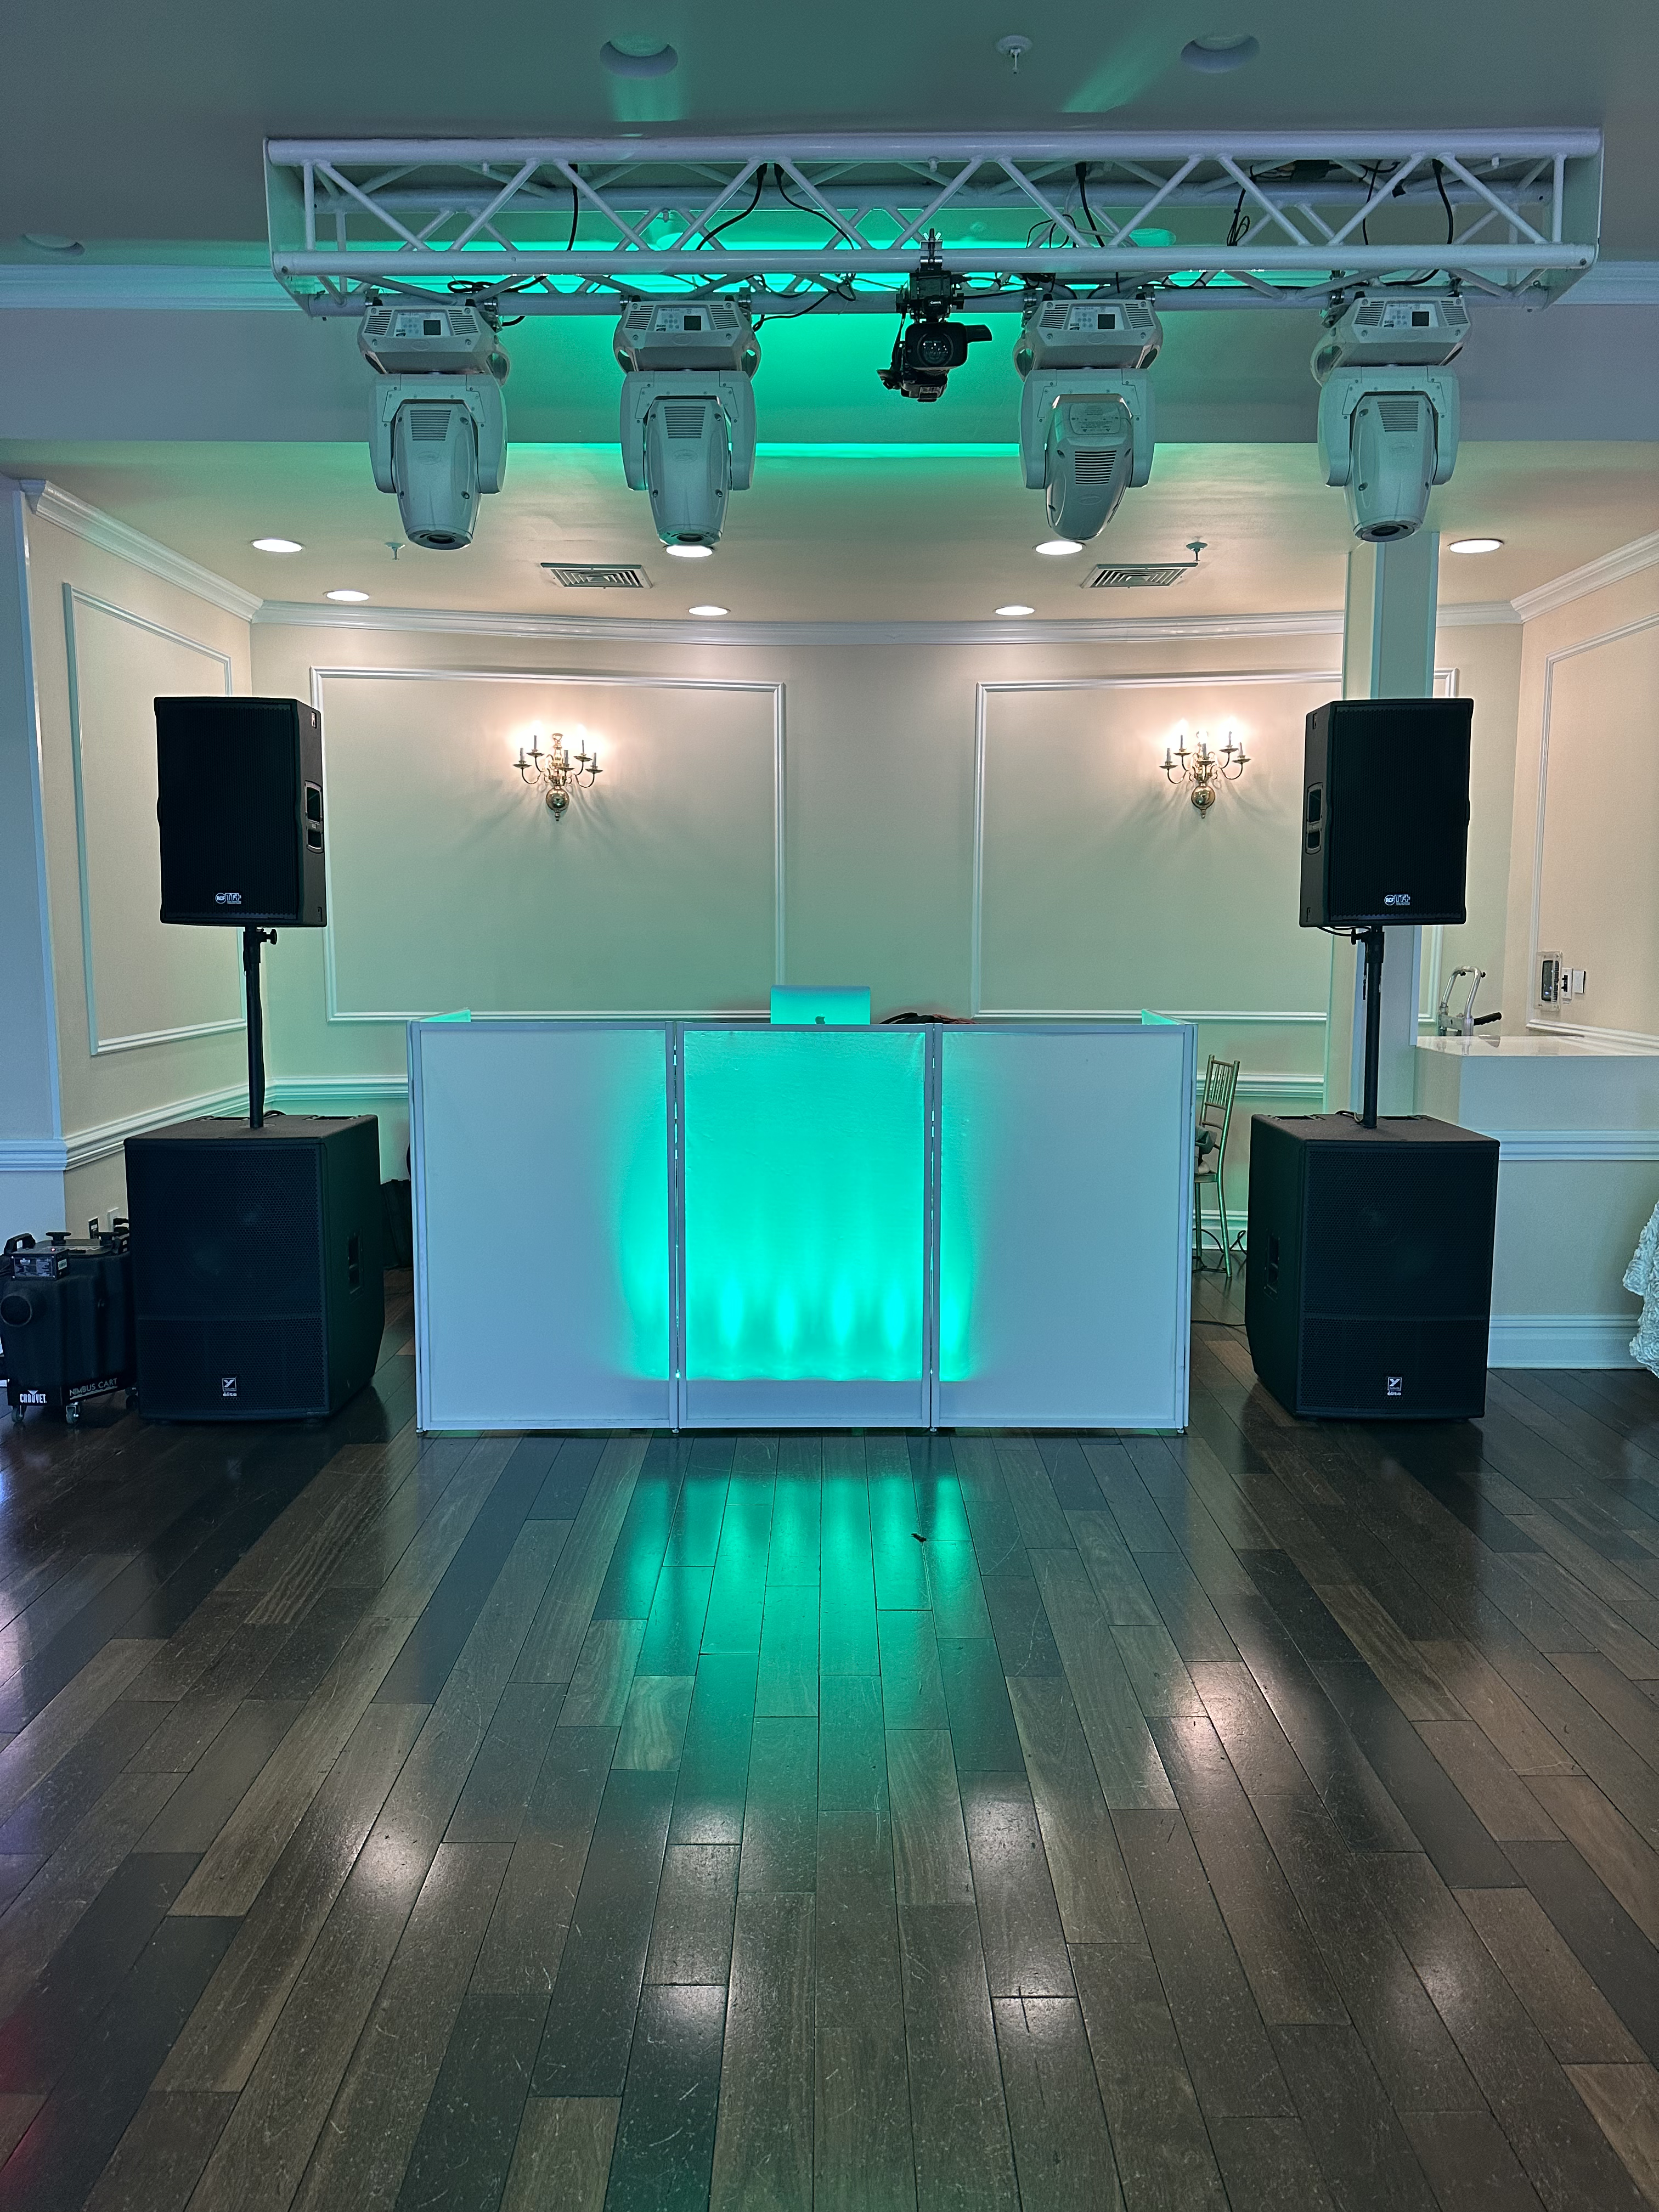 Dj Set-up at a wedding event organized by Revel Event Productions